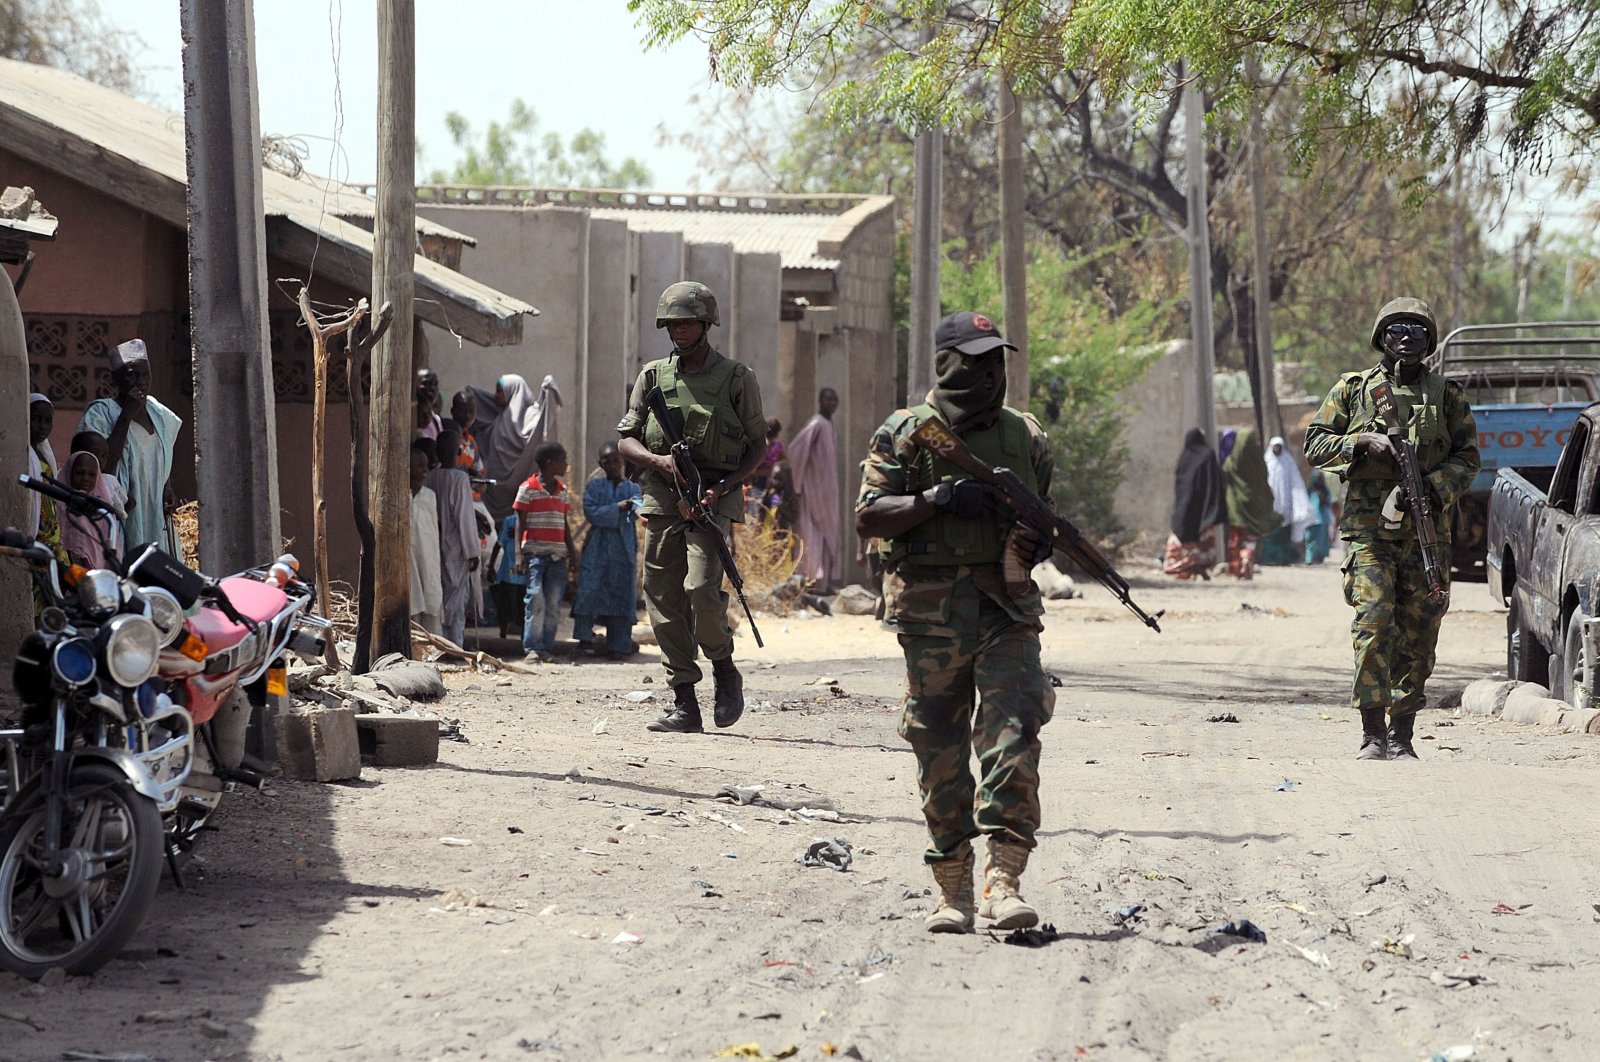 Nigerian troops patrolling in the streets of the remote northeast town of Baga, Borno State, April 30, 2013. (AFP Photo)